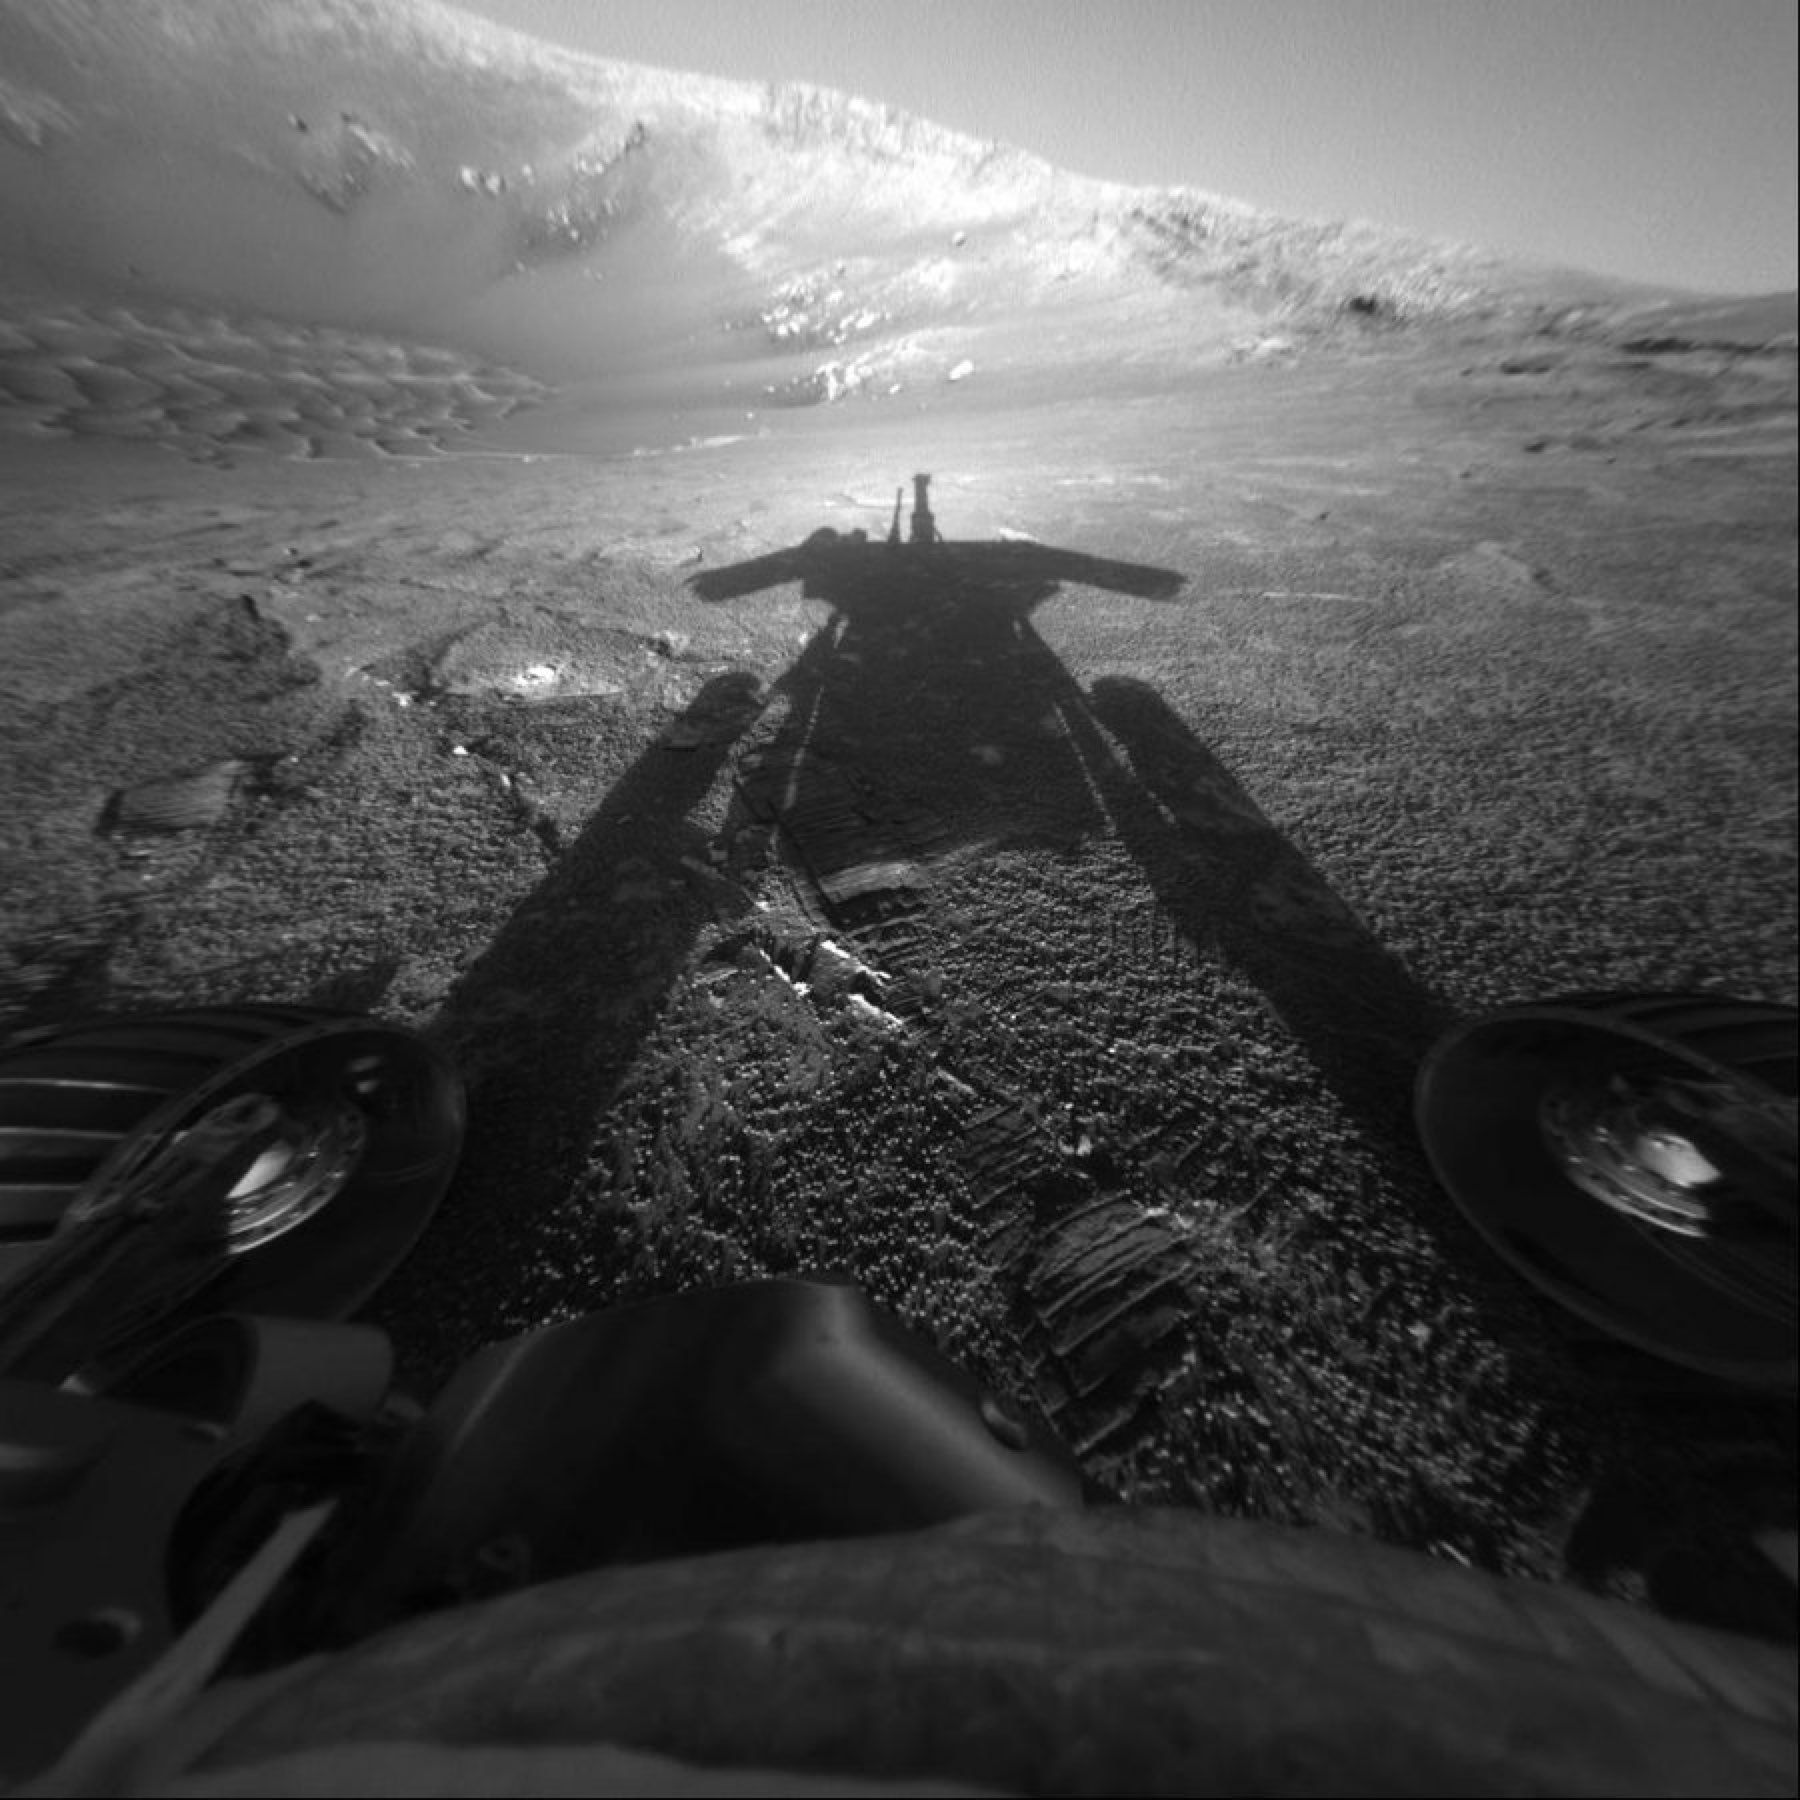 Picture from Mars Opportunity Rover via Twitter